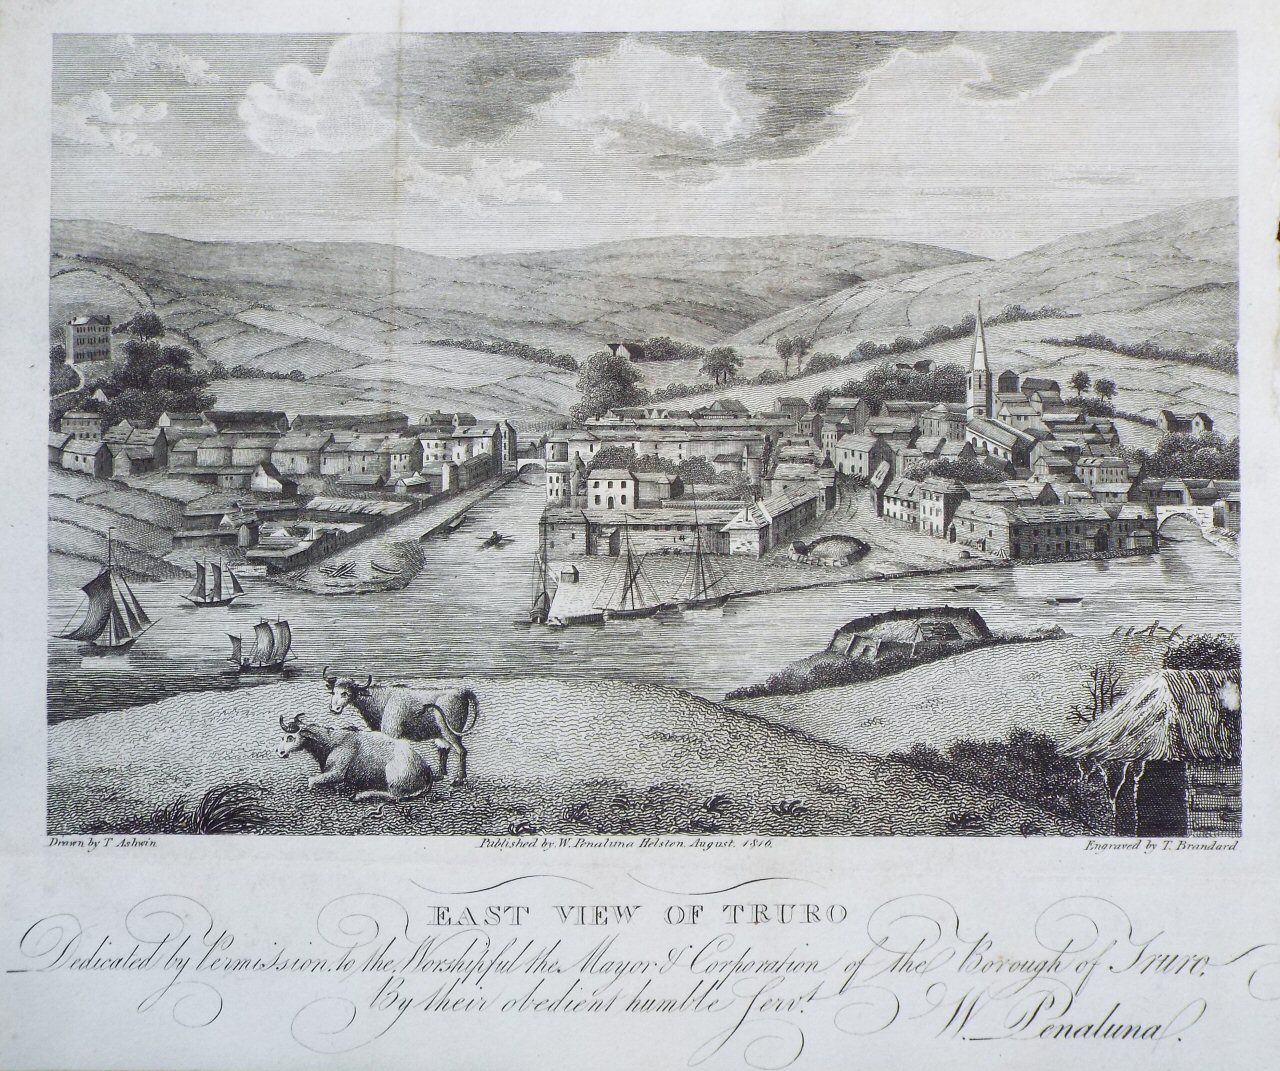 Print - East View of Truro. Dedicated by Permission to the Worshipful the Mayor & Corporation of the Borough of Truro, by their obedient humble Servant, W. Penaluna. - Brandard